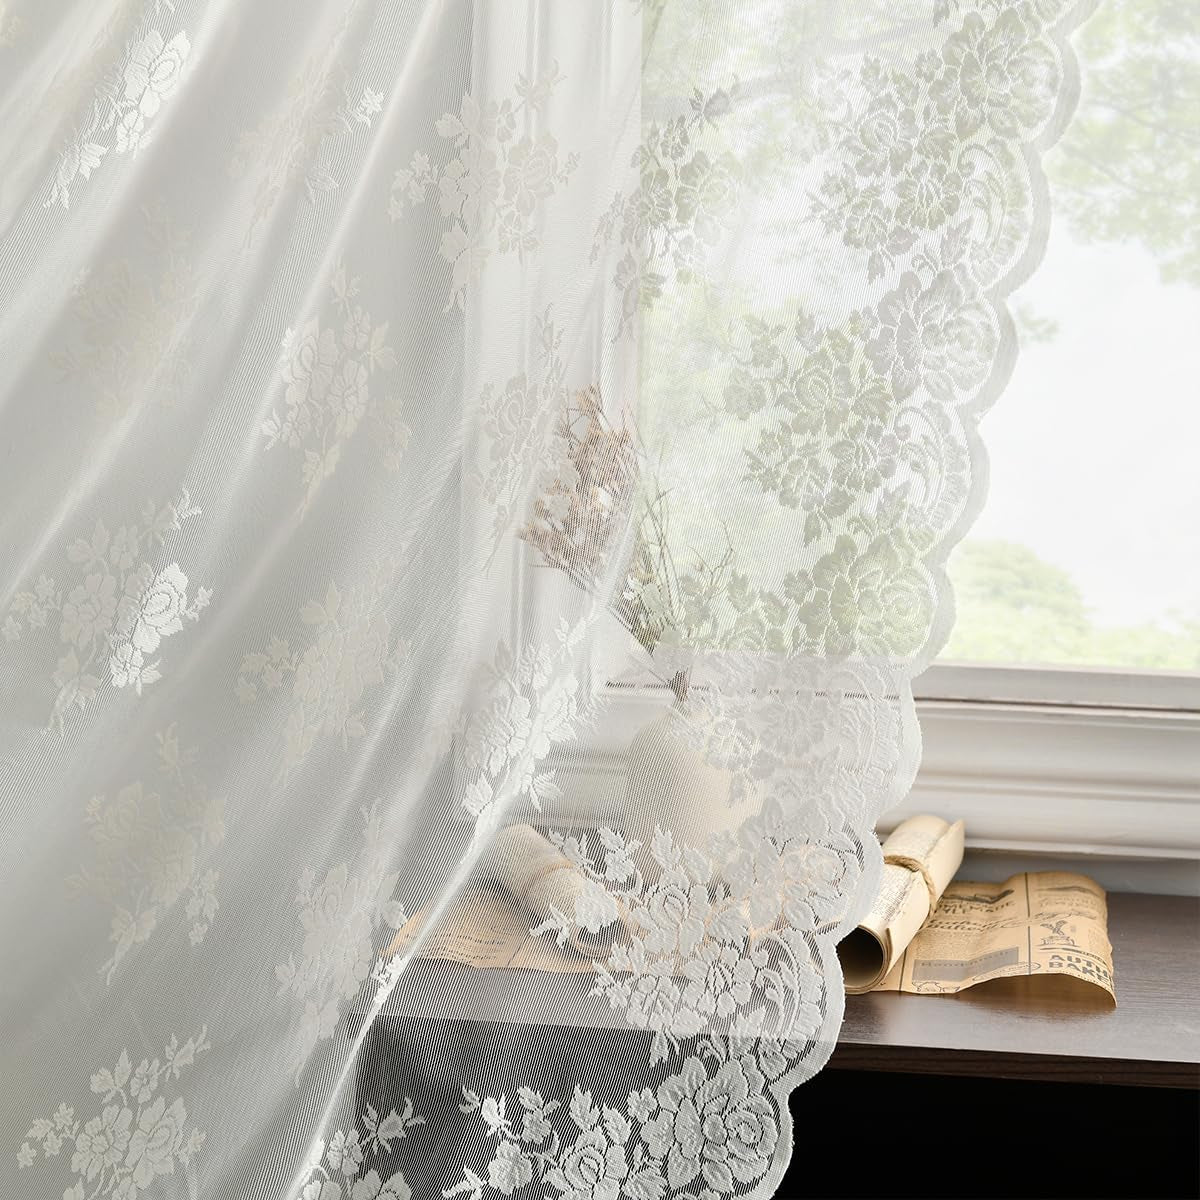 Kotile Sage Green Sheer Valance Curtain for Windows, Rustic Floral Spring Sheer Window Valance Curtain 18 Inch Length, Light Filtering Rod Pocket Lace Valance, 52 X 18 Inch, 1 Panel, Sage Green  Kotile Textile Ivory 52 In X 84 In (W X L) 